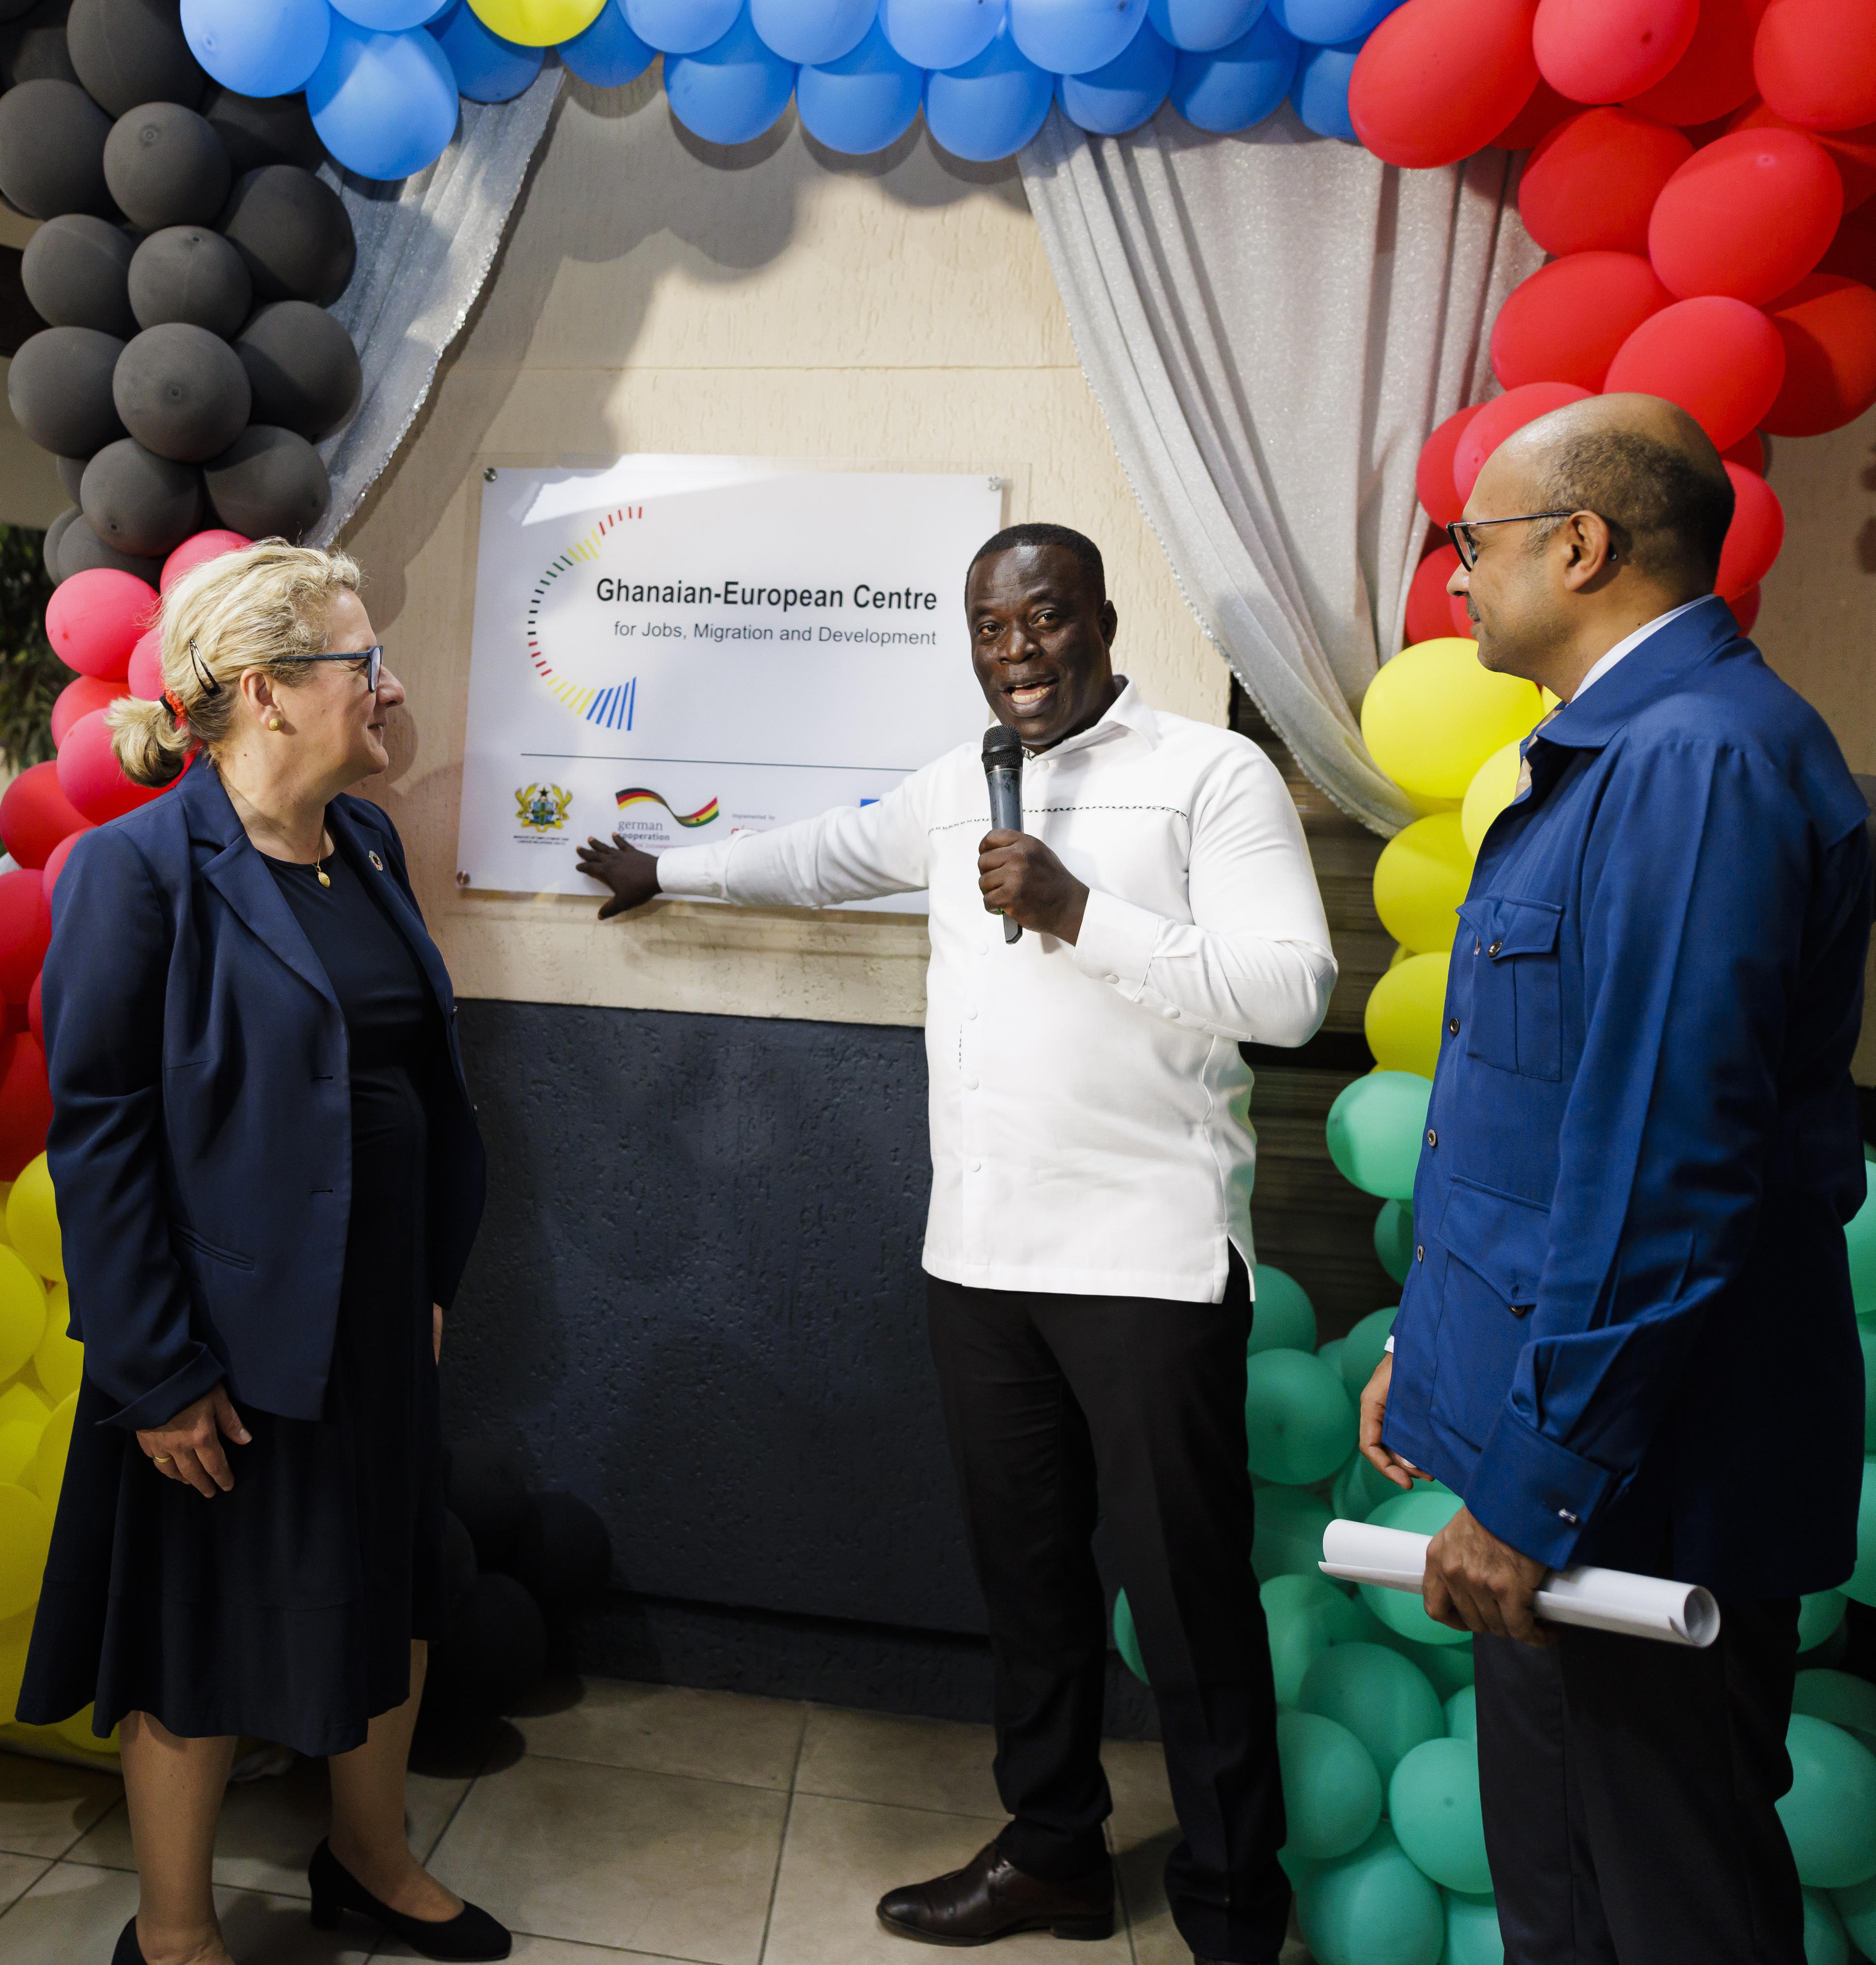 Opening of the Ghanaian-German Migration Advisory Centre in Accra, which has been expanded into a comprehensive "Centre for Jobs, Migration and Development". The centre is part of the lighthouse initiative "Centres for Migration and Development".